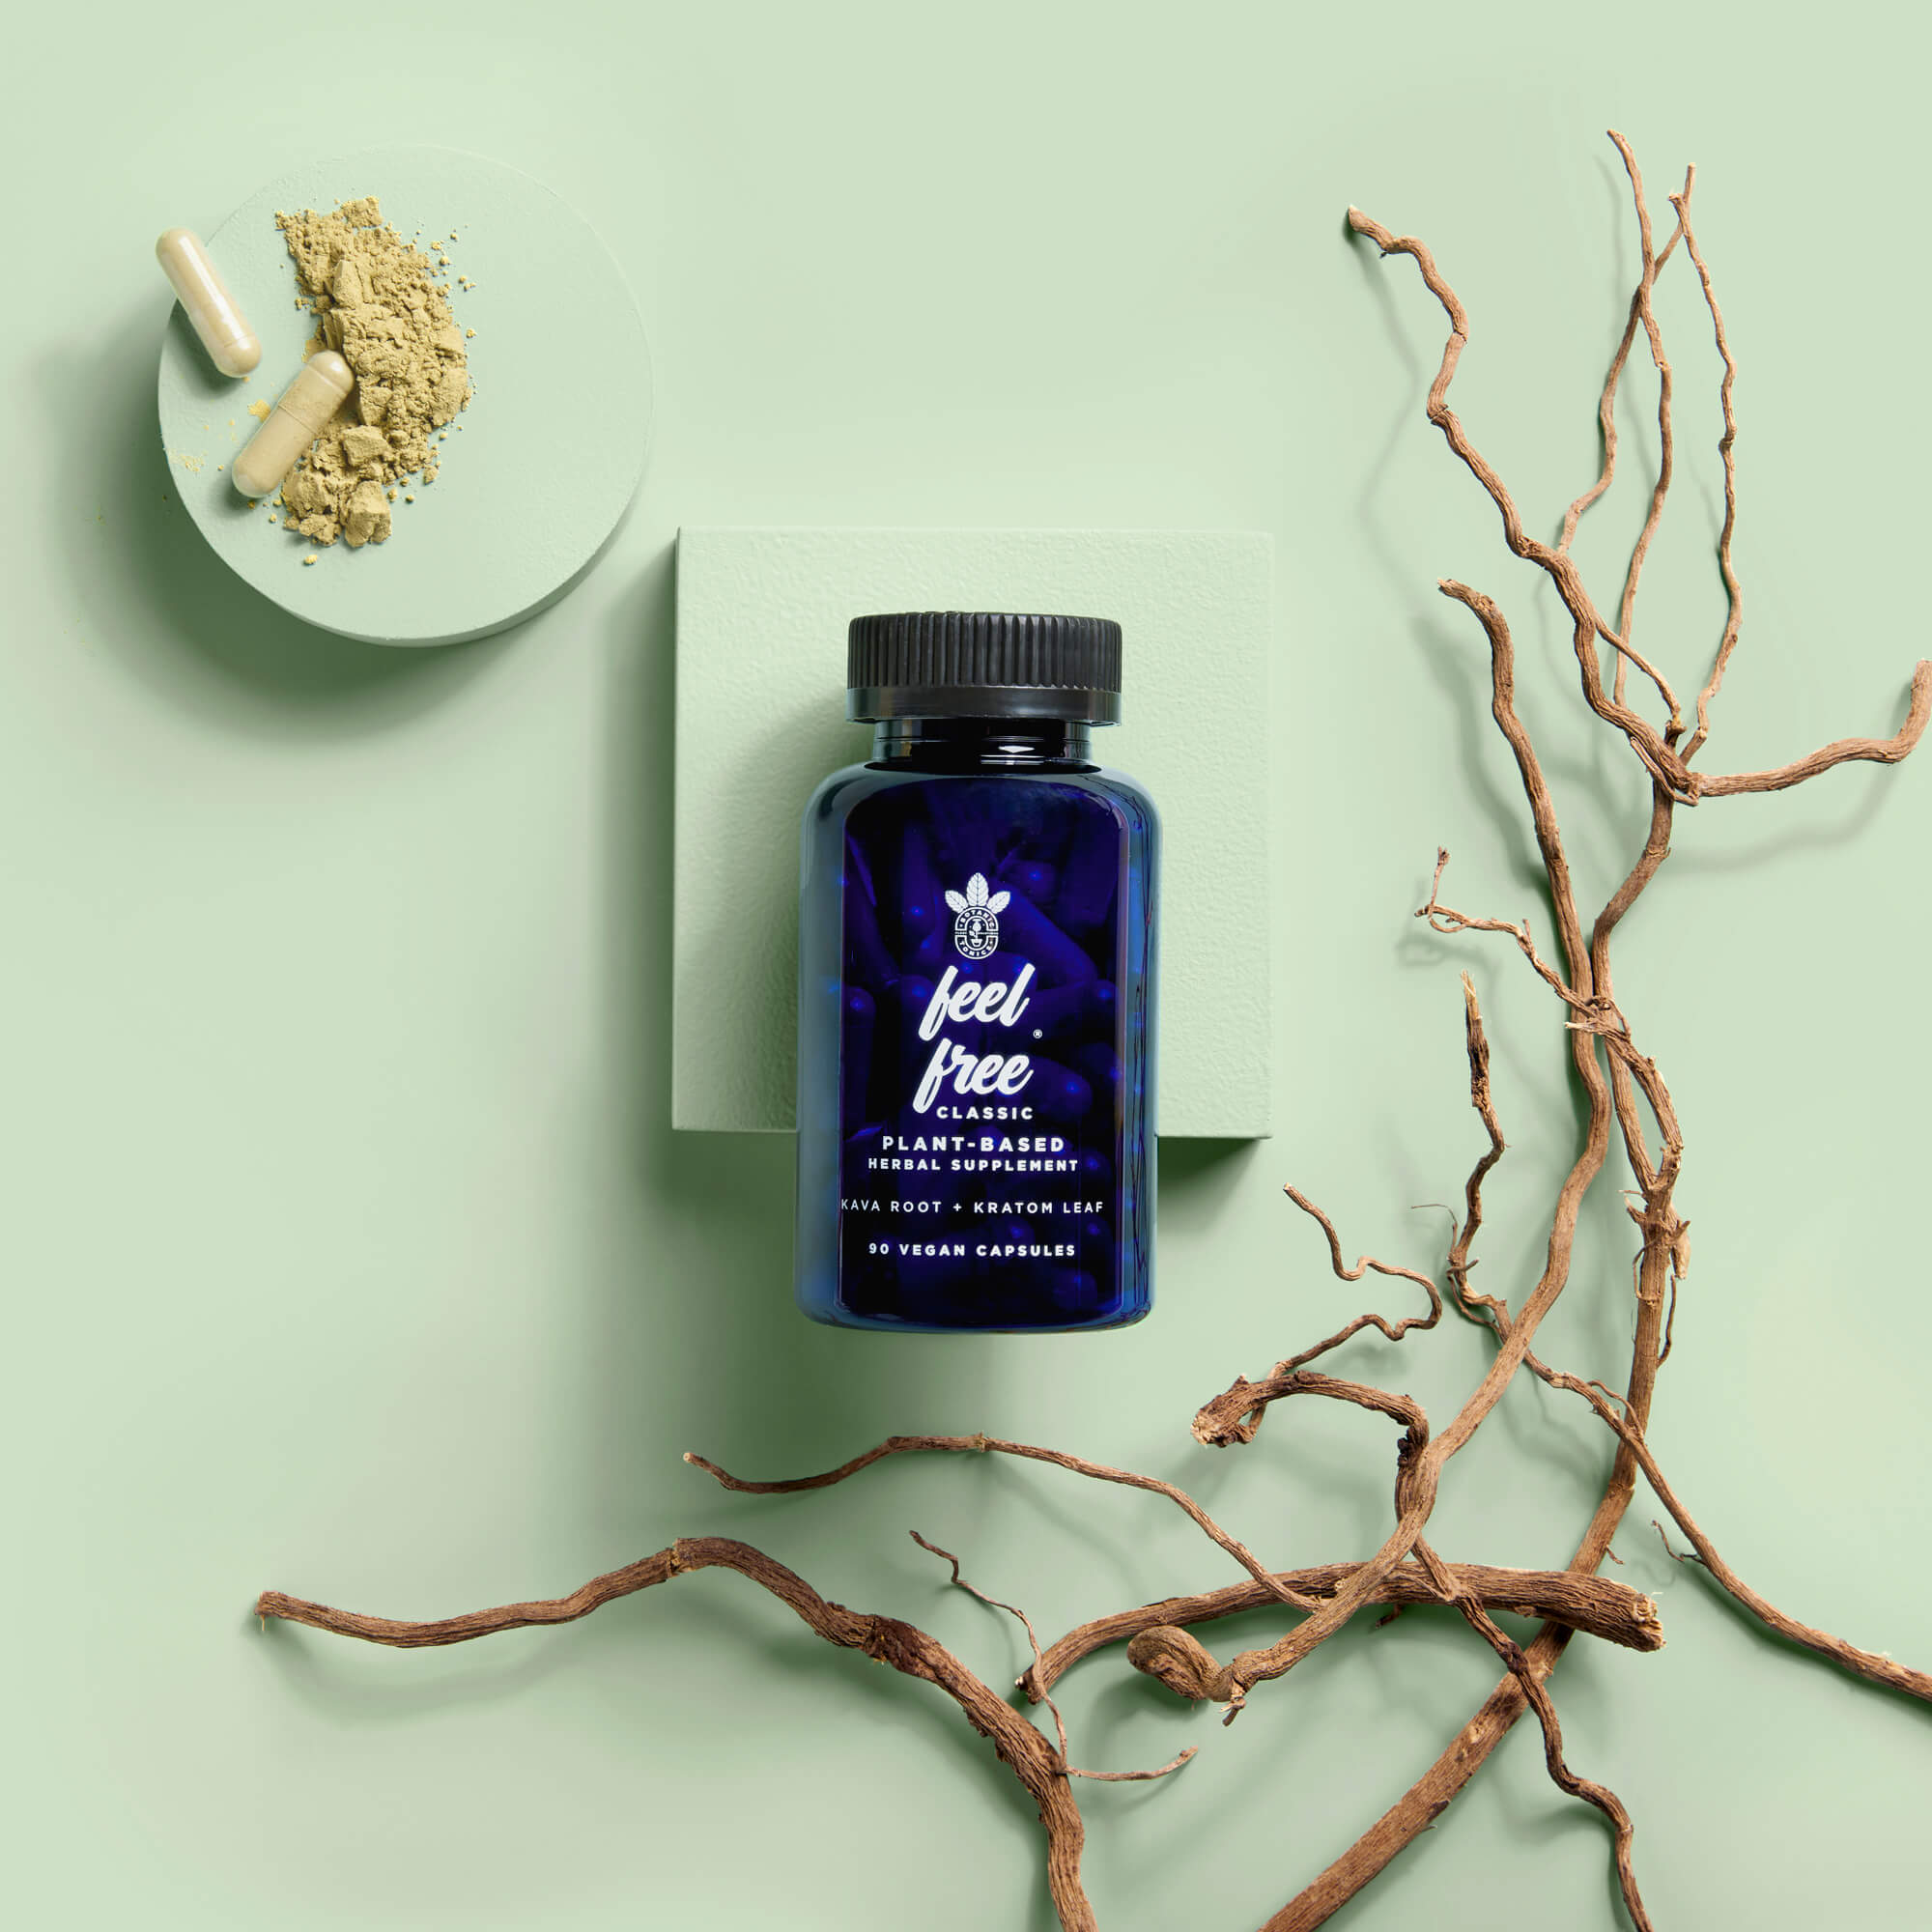 feel free classic wellness capsules - bottle with some twigs